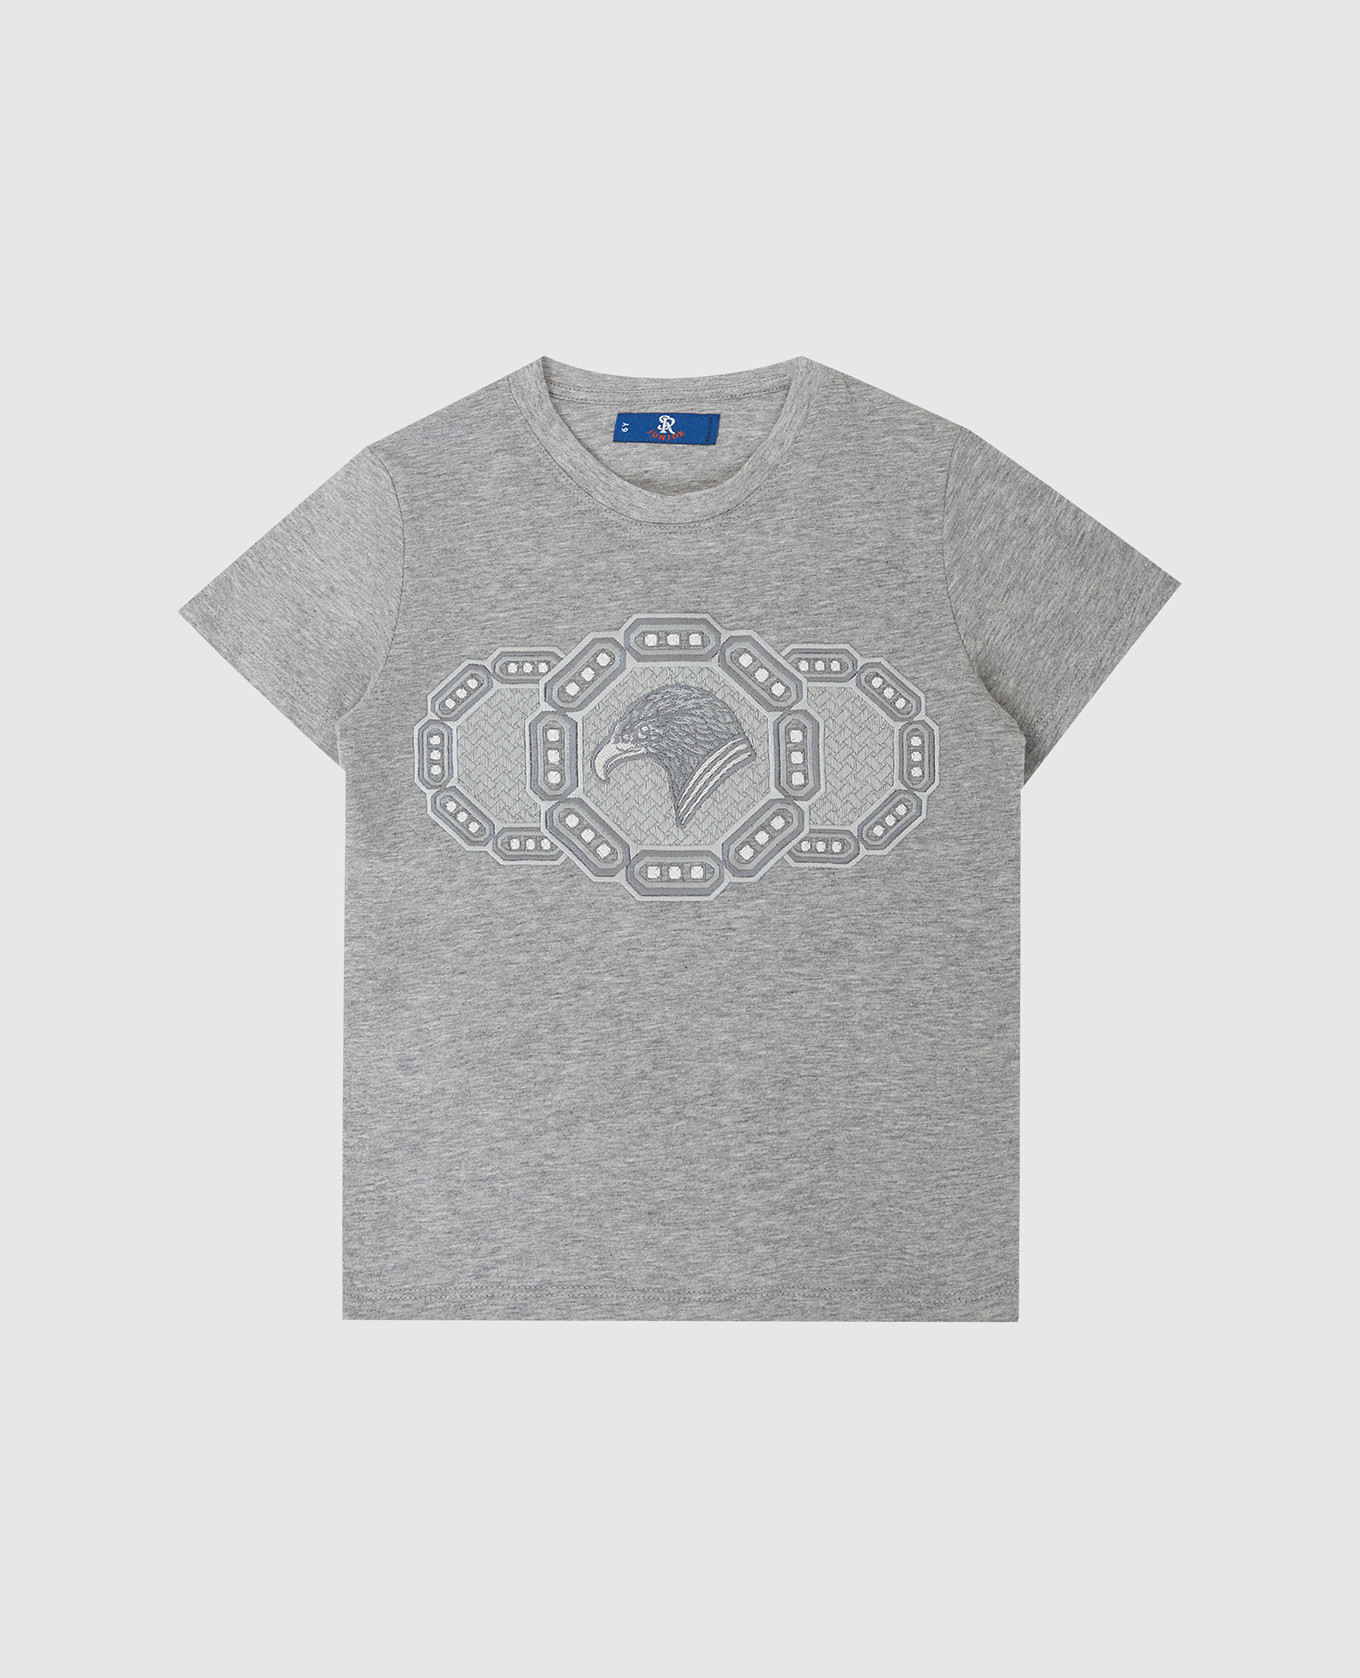 Children's gray t-shirt with logo embroidery